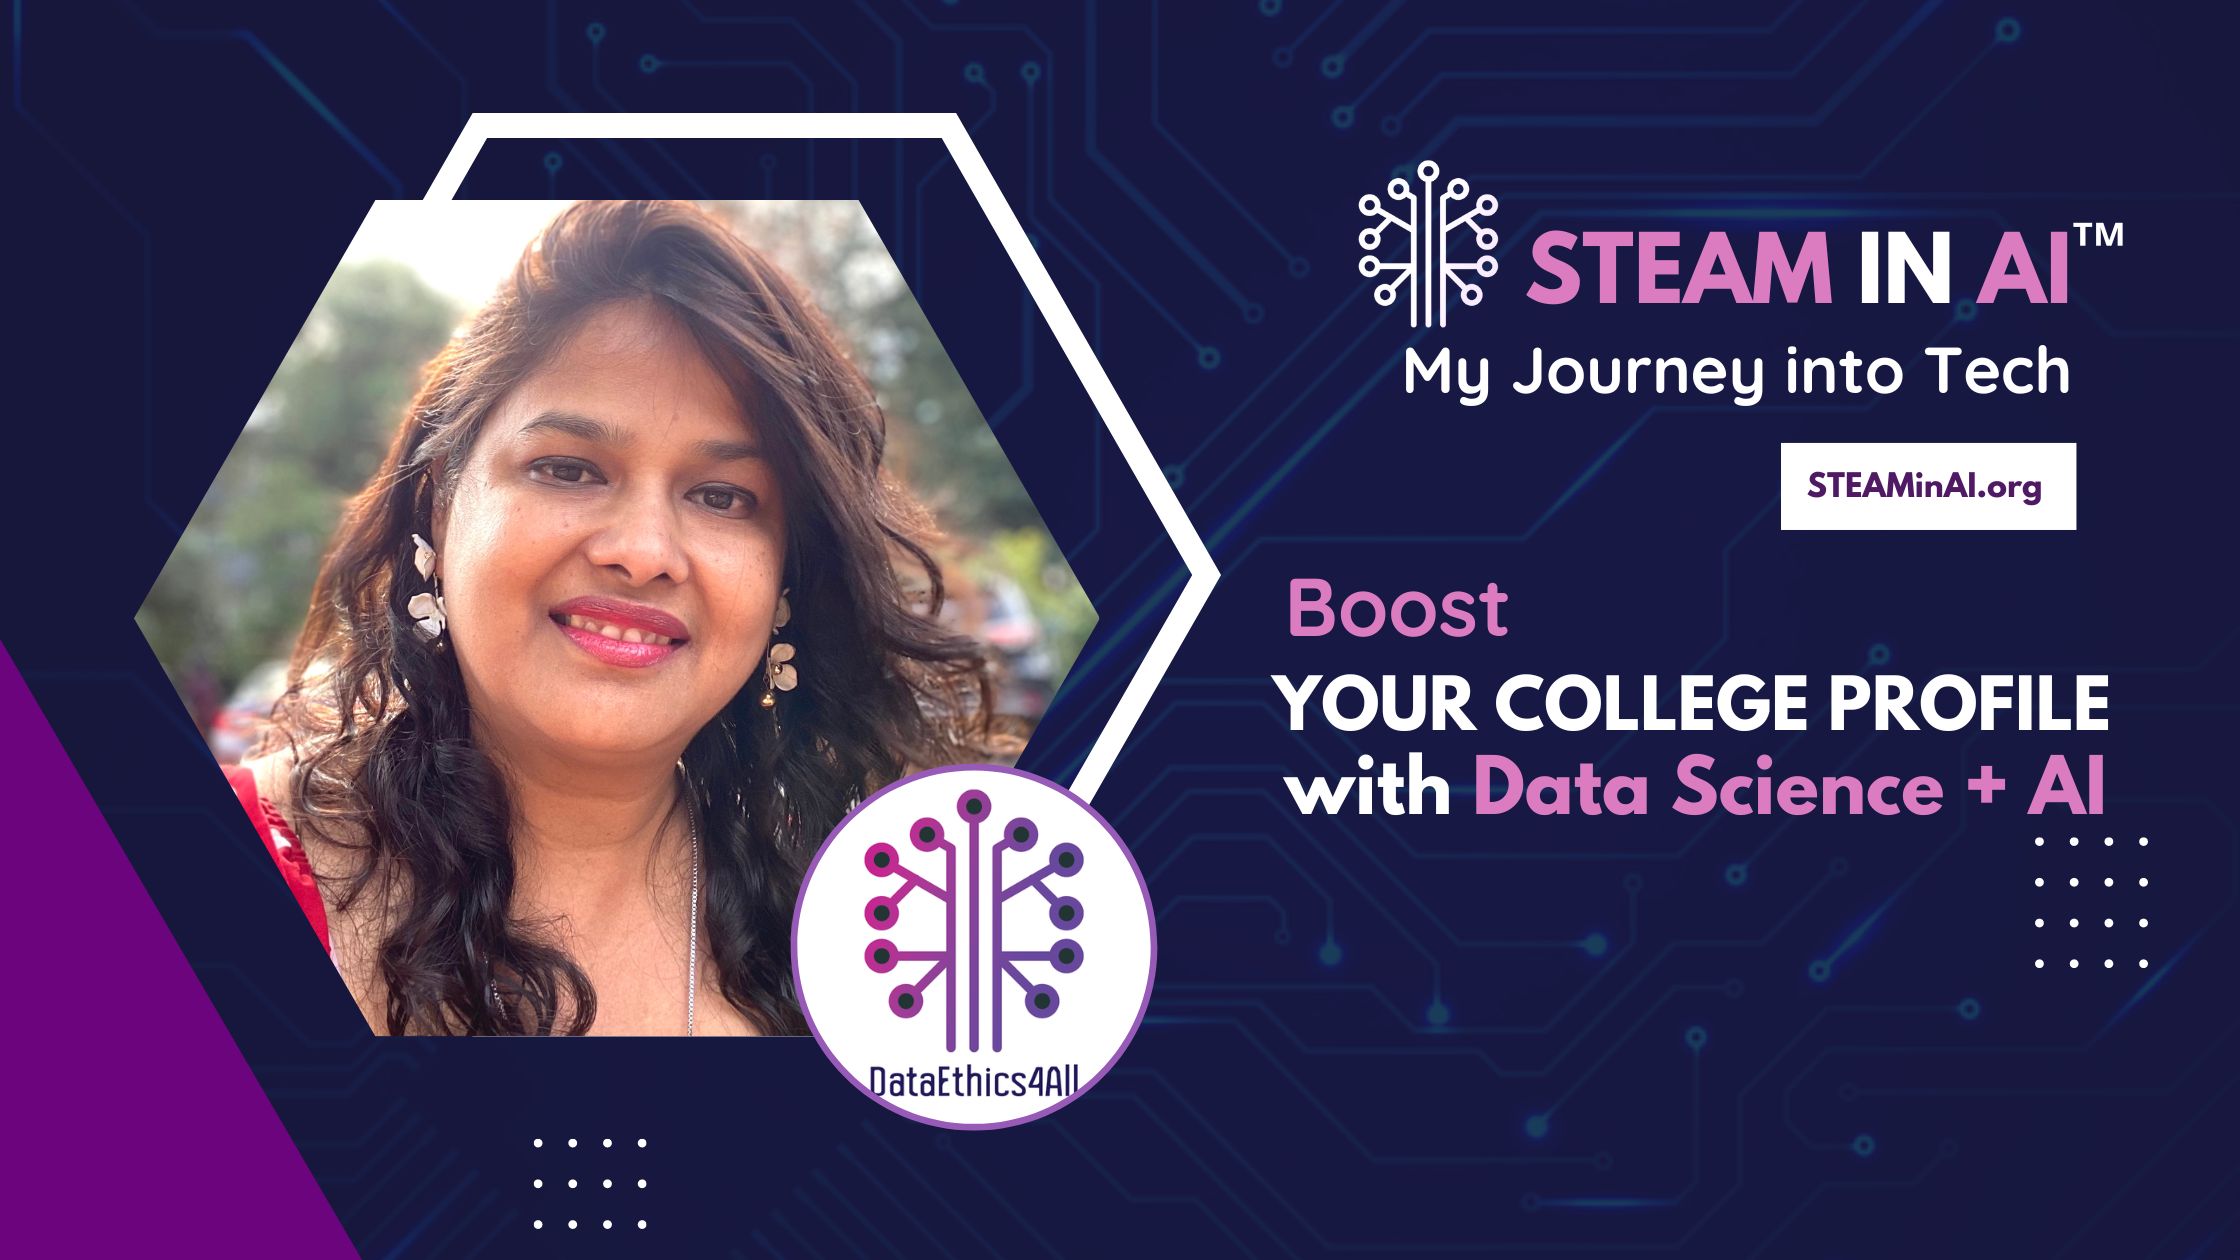 My Journey into Tech Boost Your College Applicant Profile with Data Science and AI